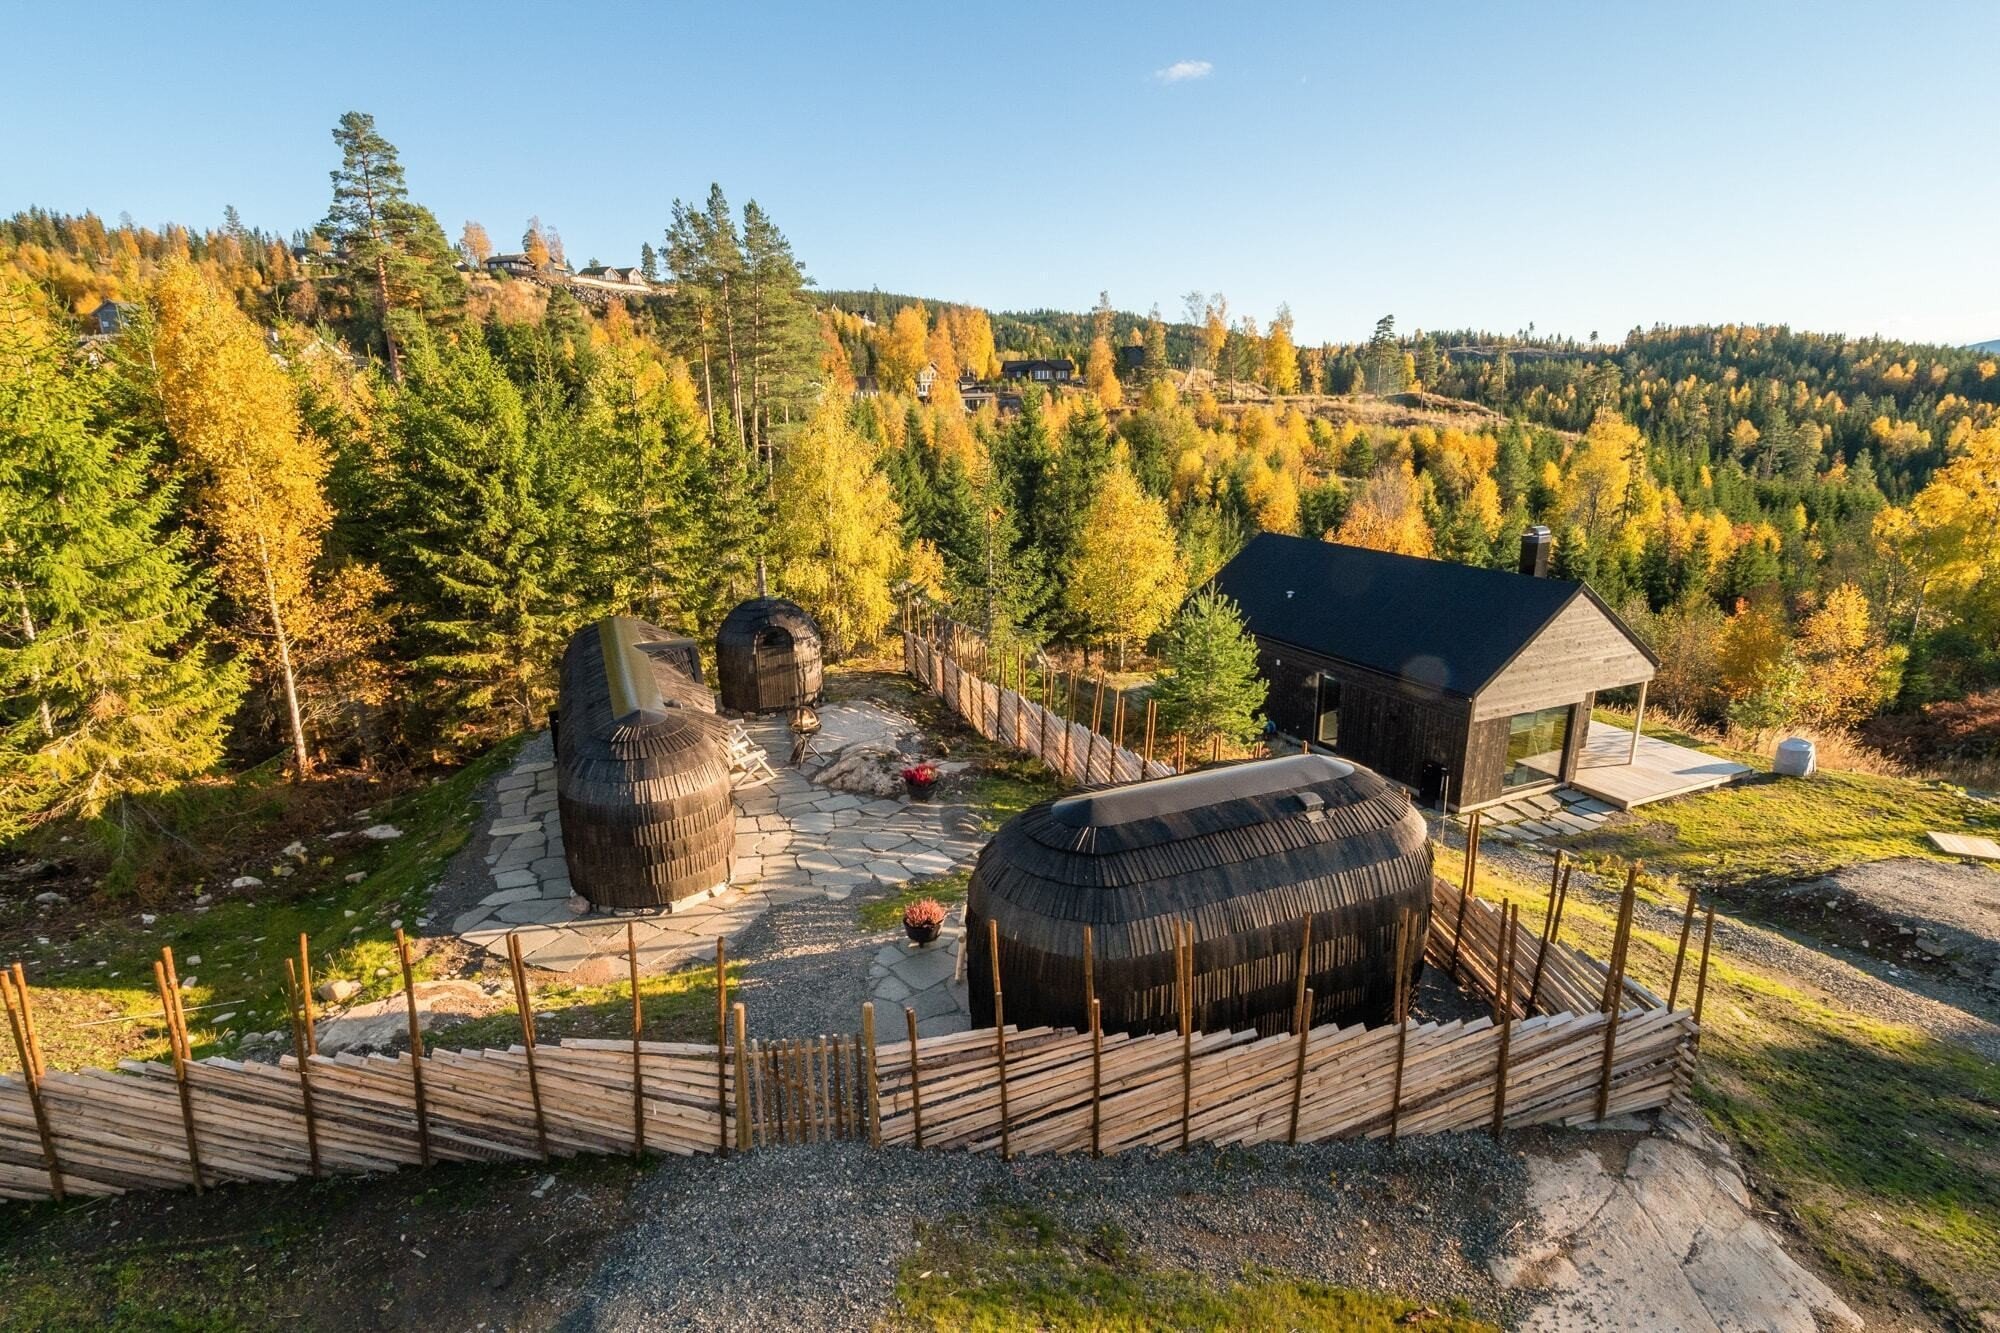 Saunas and cabins in a forested area